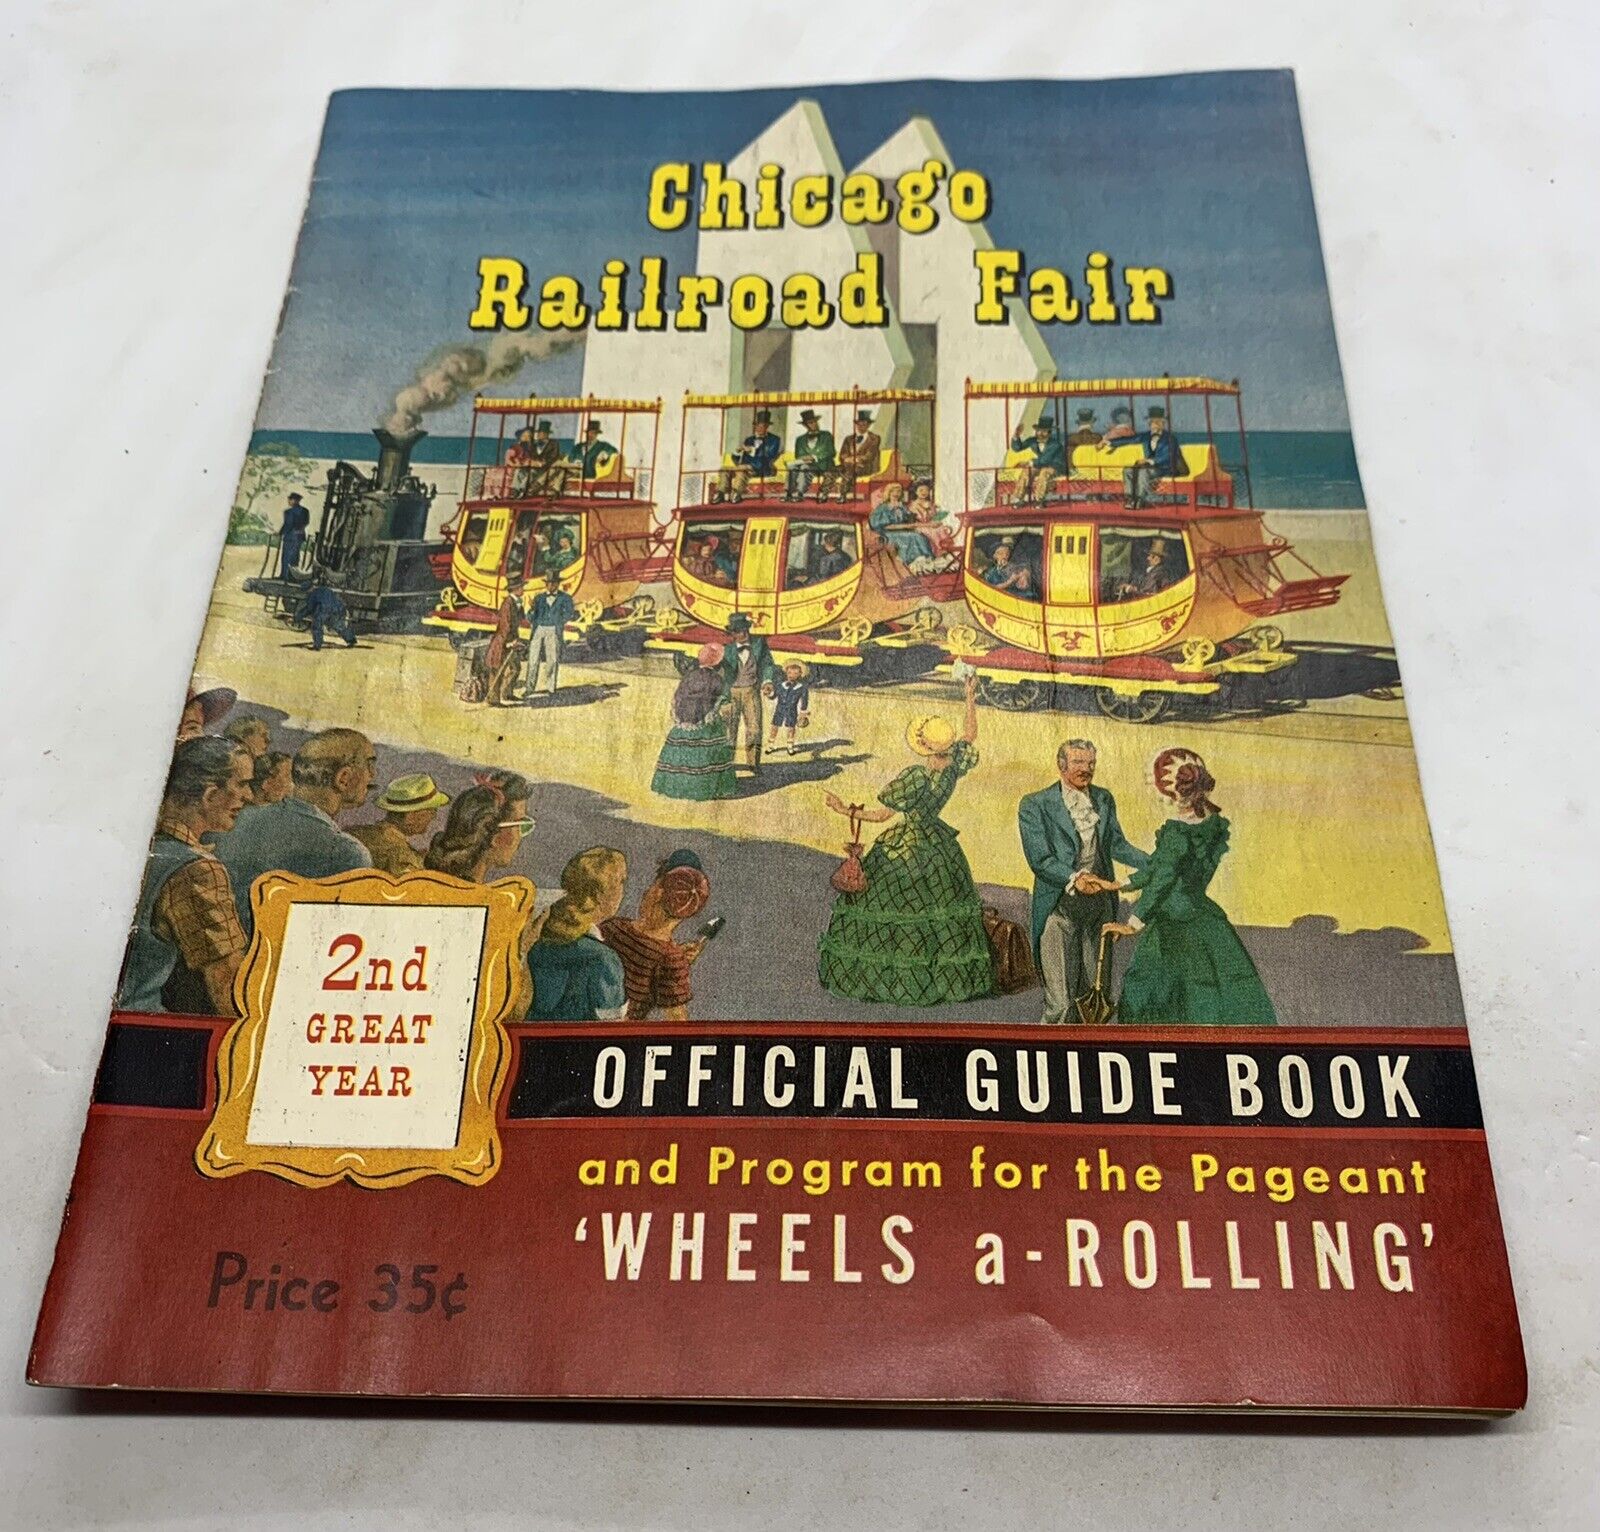 Vintage 1949 Chicago Railroad Fair Official Guide Book - In Great Shape